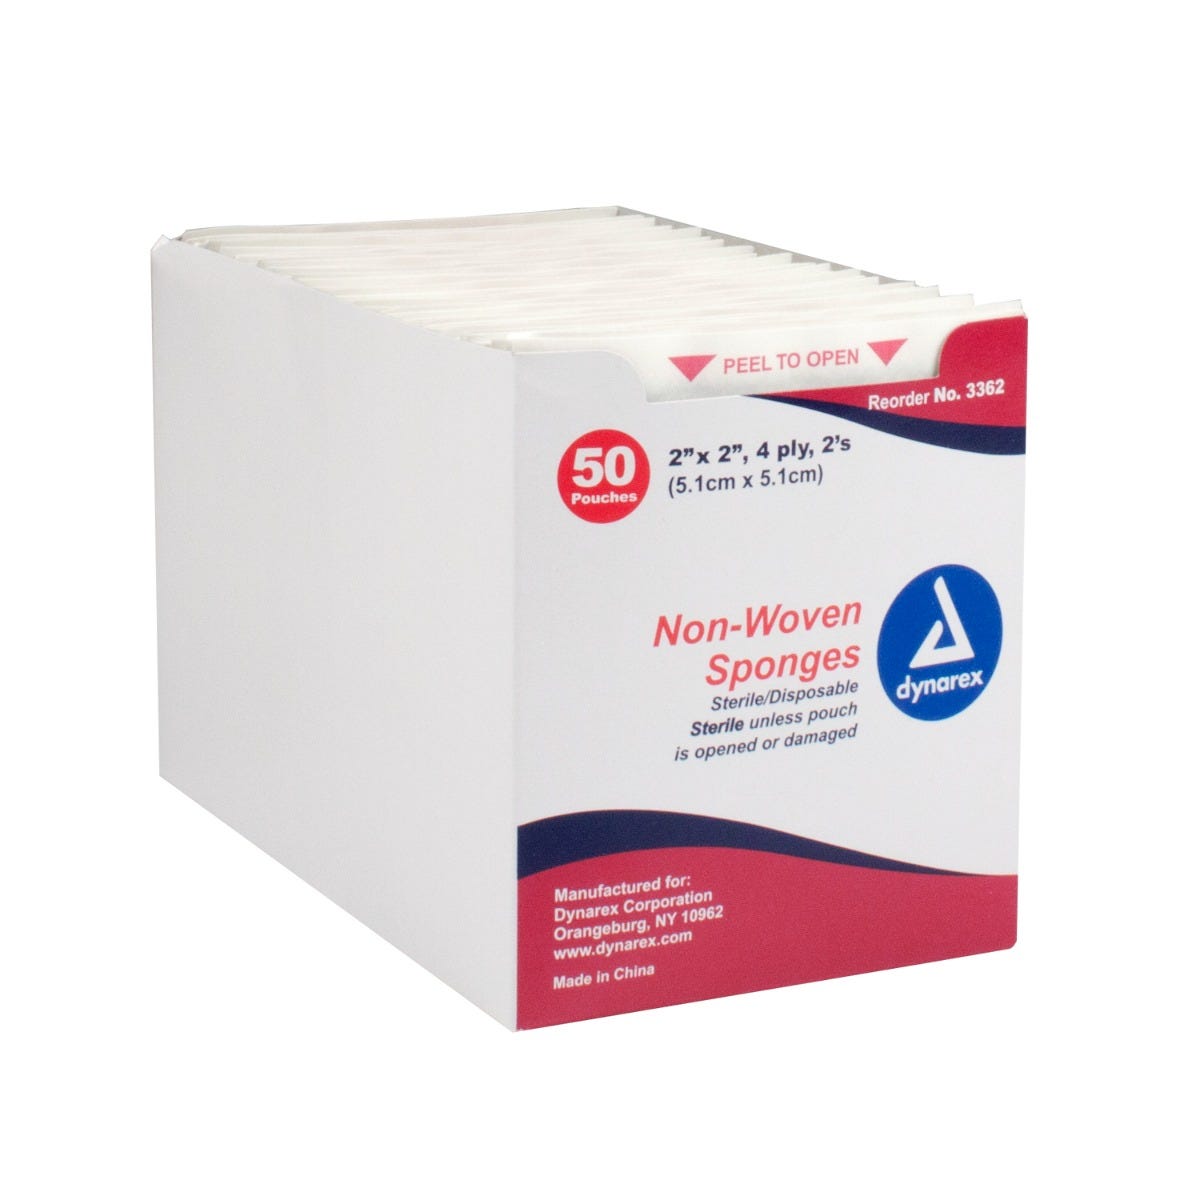 Nonwoven General Use Sponges, Sterile - 2" x 2", 4-ply, 2's, 3000/Case